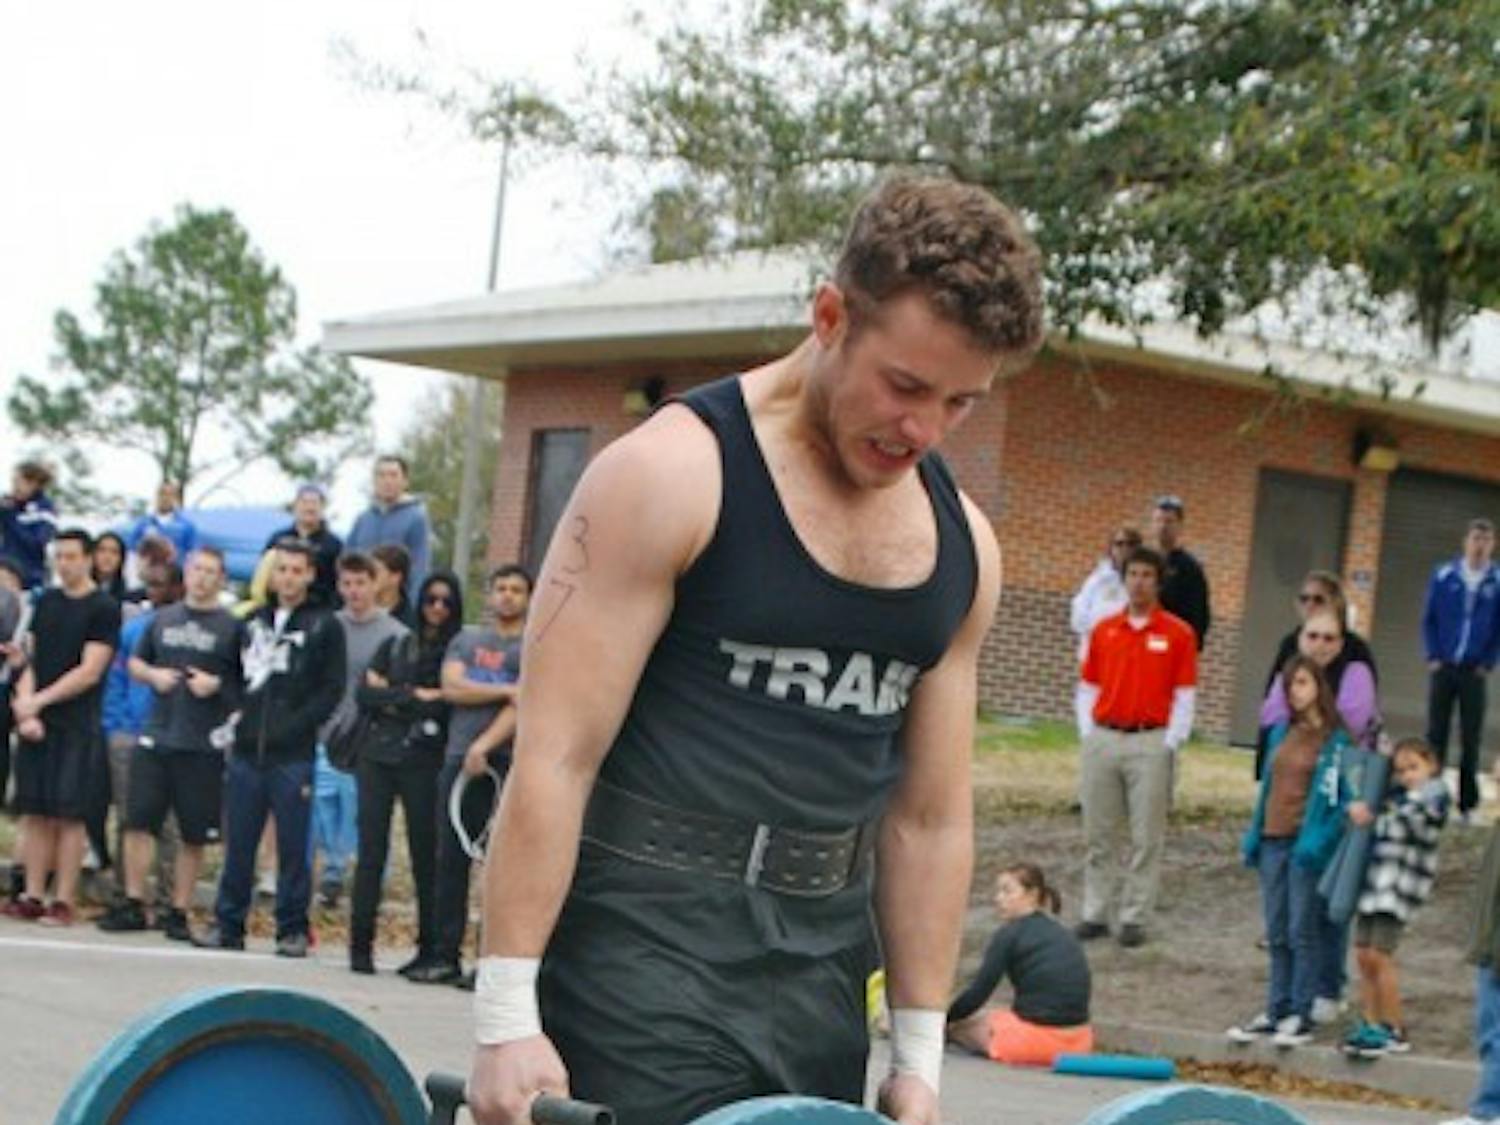 Economics junior Matthew Schaler participates in the Strong Gator competition at Maguire Field on Saturday.